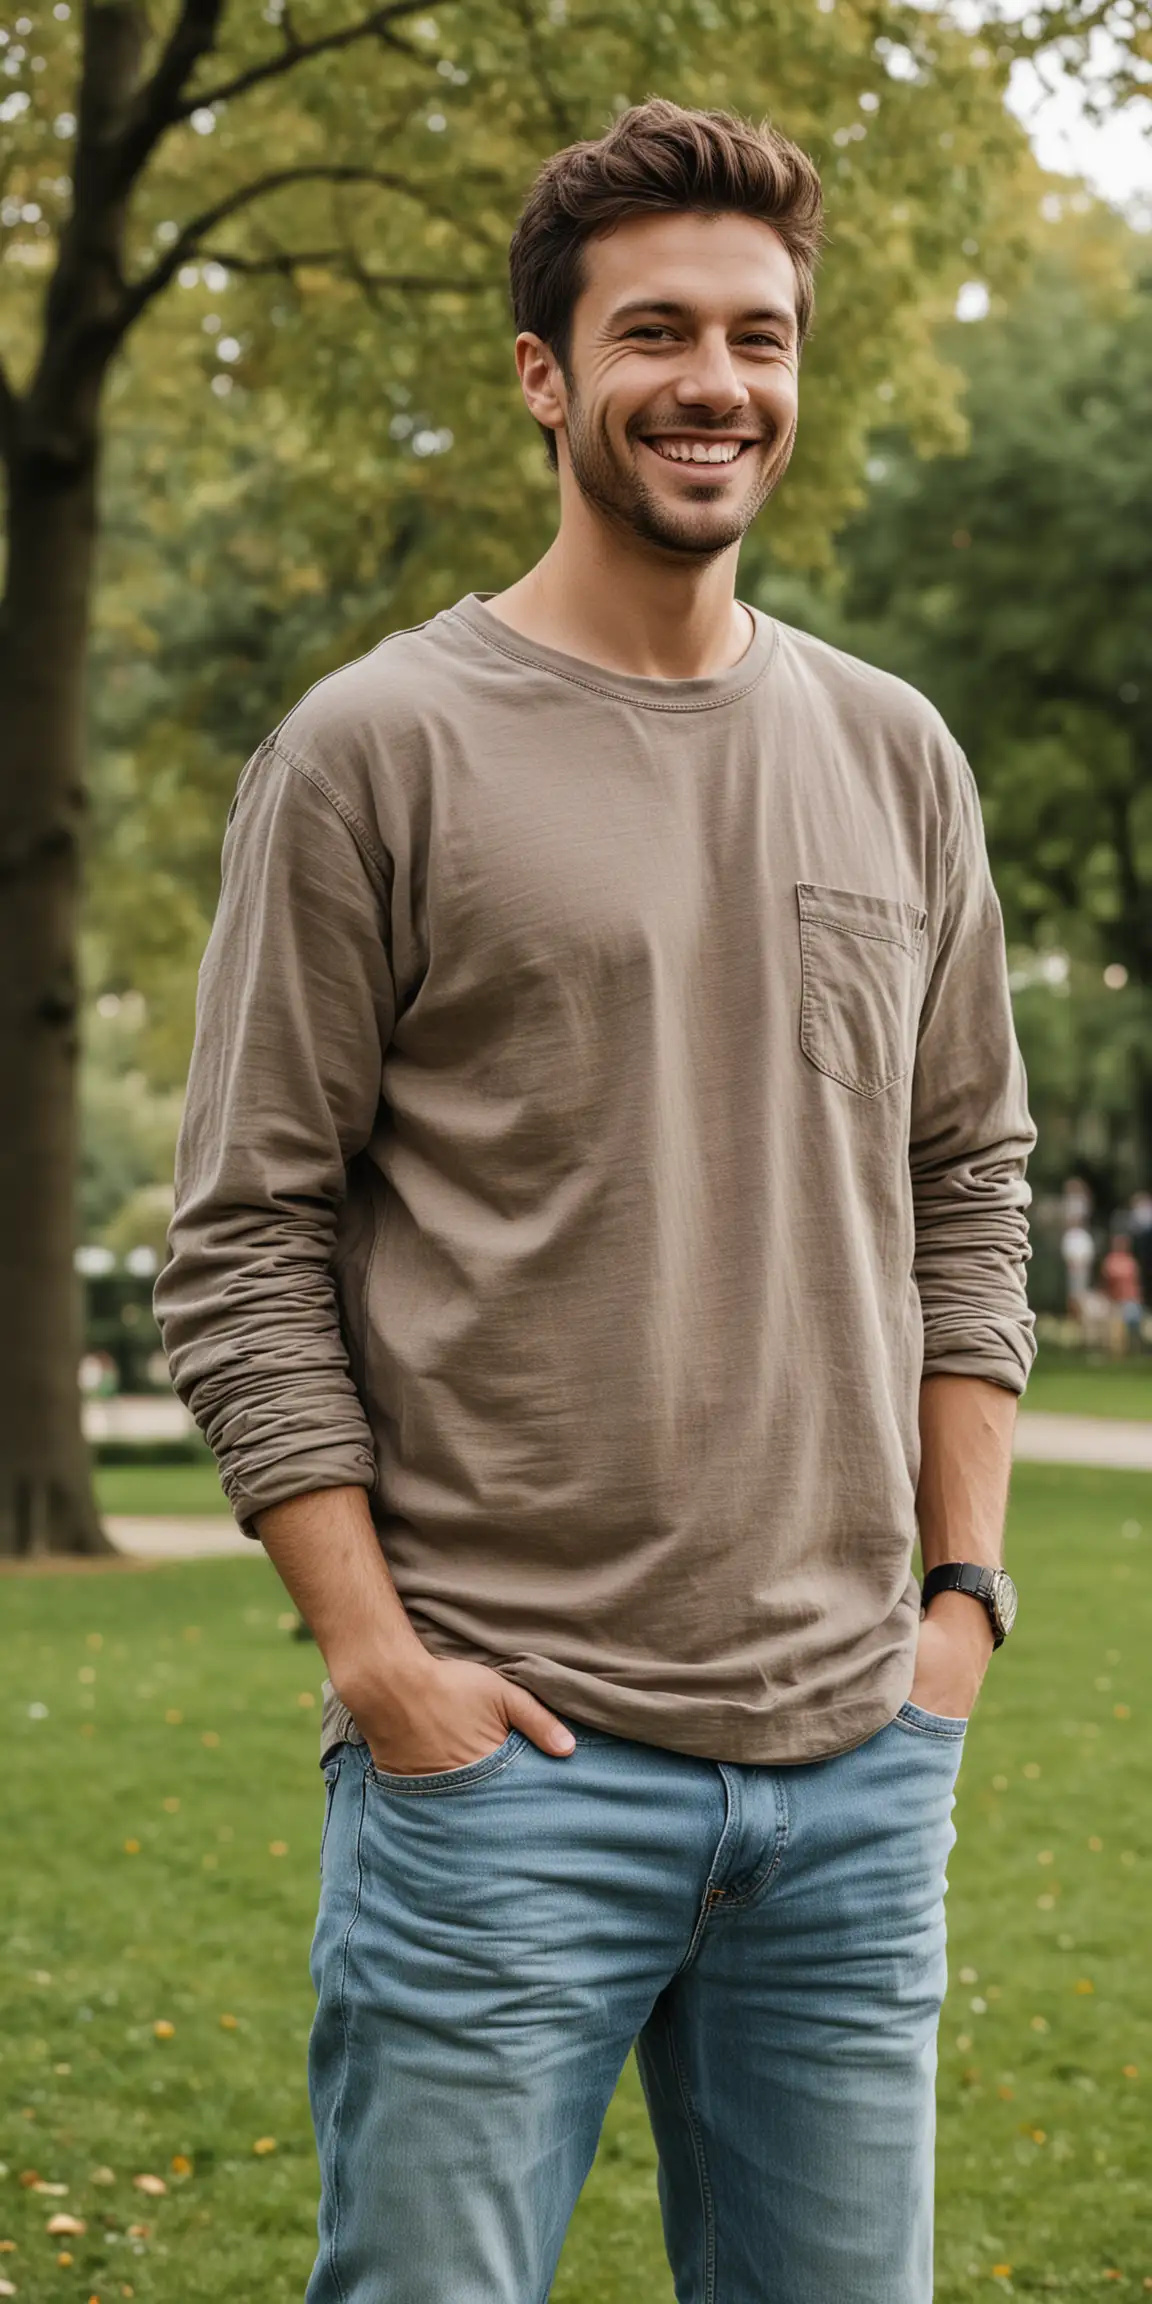 Smiling Man in Casual Clothes Standing in Park Setting